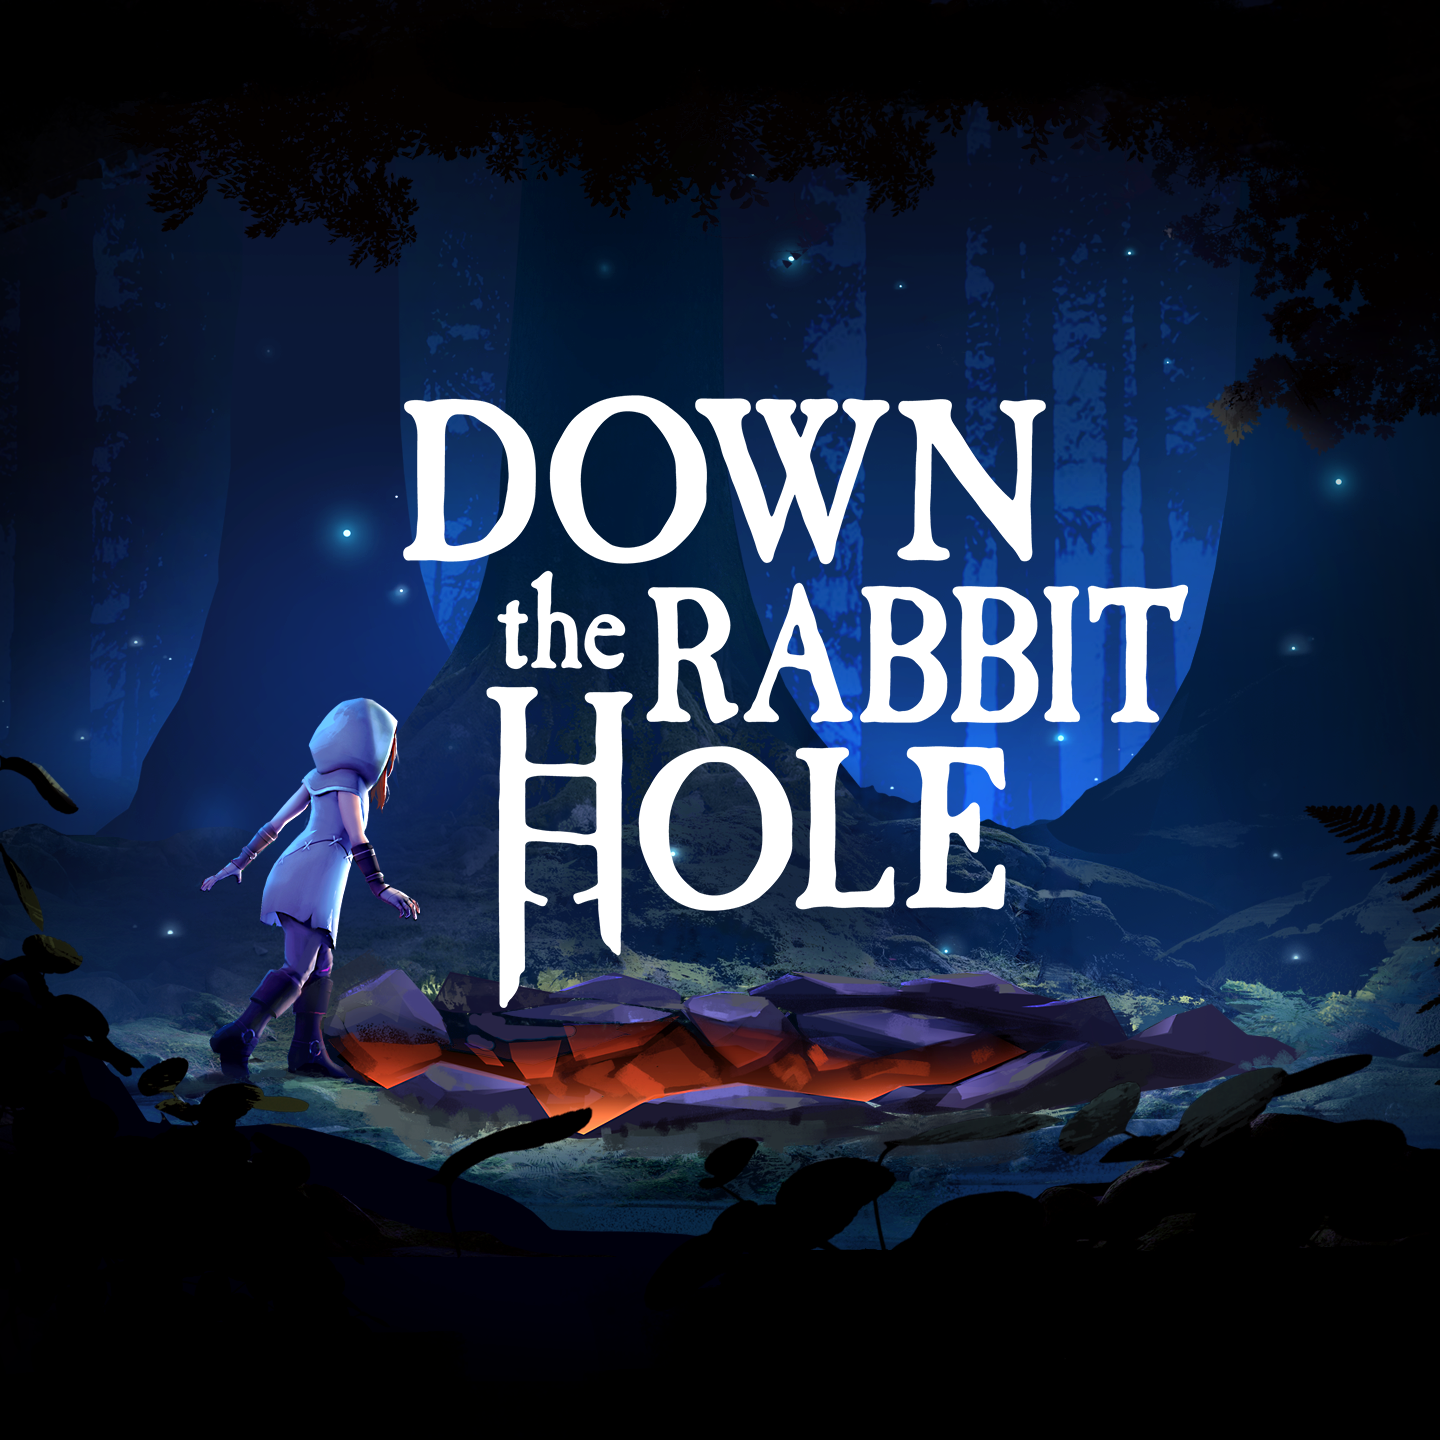 Channel rabbit hole animation. Down the Rabbit hole. Rabbit hole игра. The Rabbit hole VR. Down the Rabit hole.